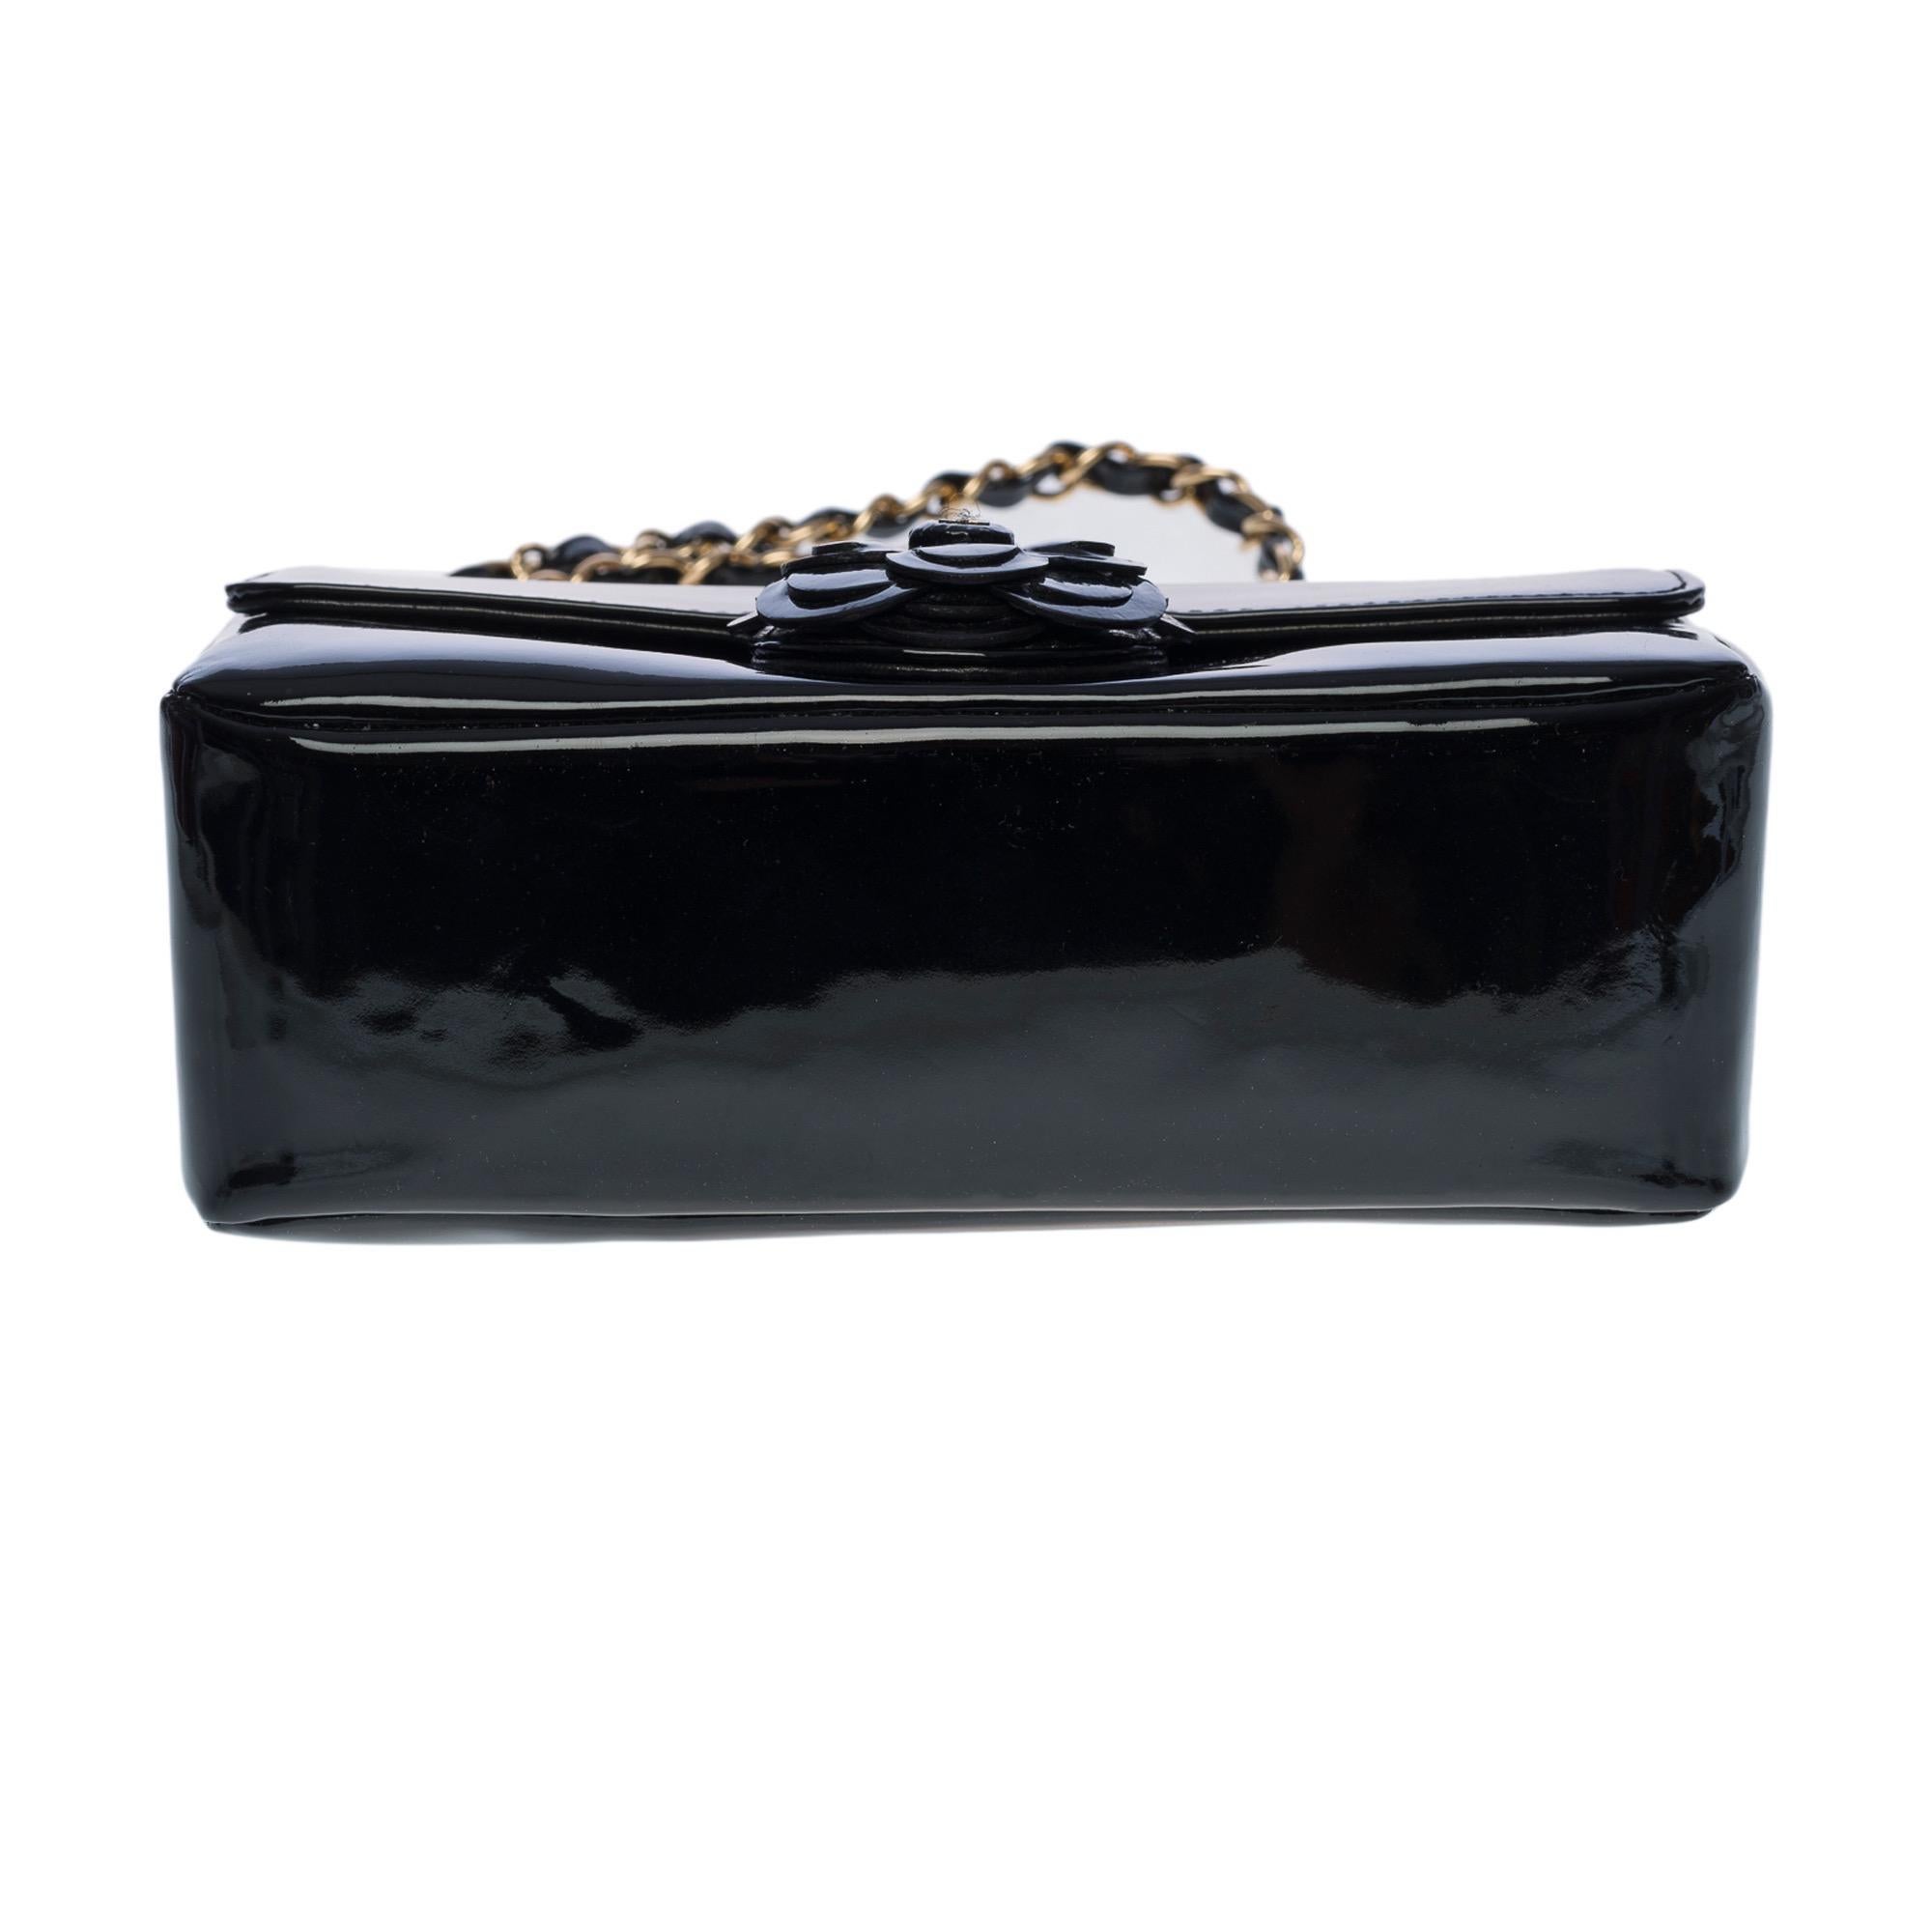 Rare Chanel Classic Timeless Camellia Mini flap bag in black patent leather, GHW 3